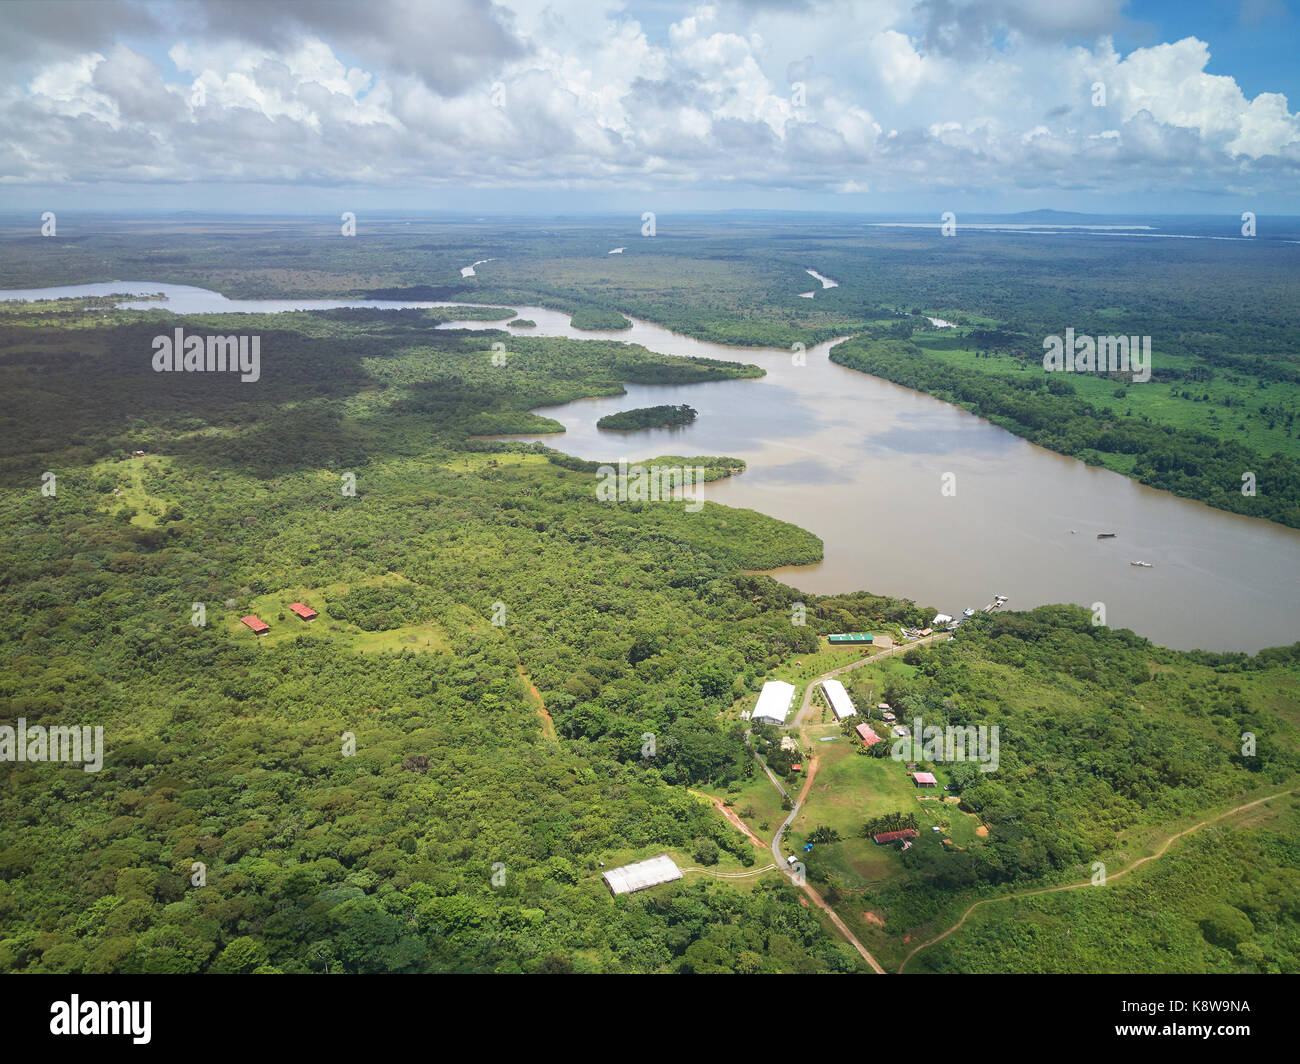 River in central america aerial drone view Stock Photo